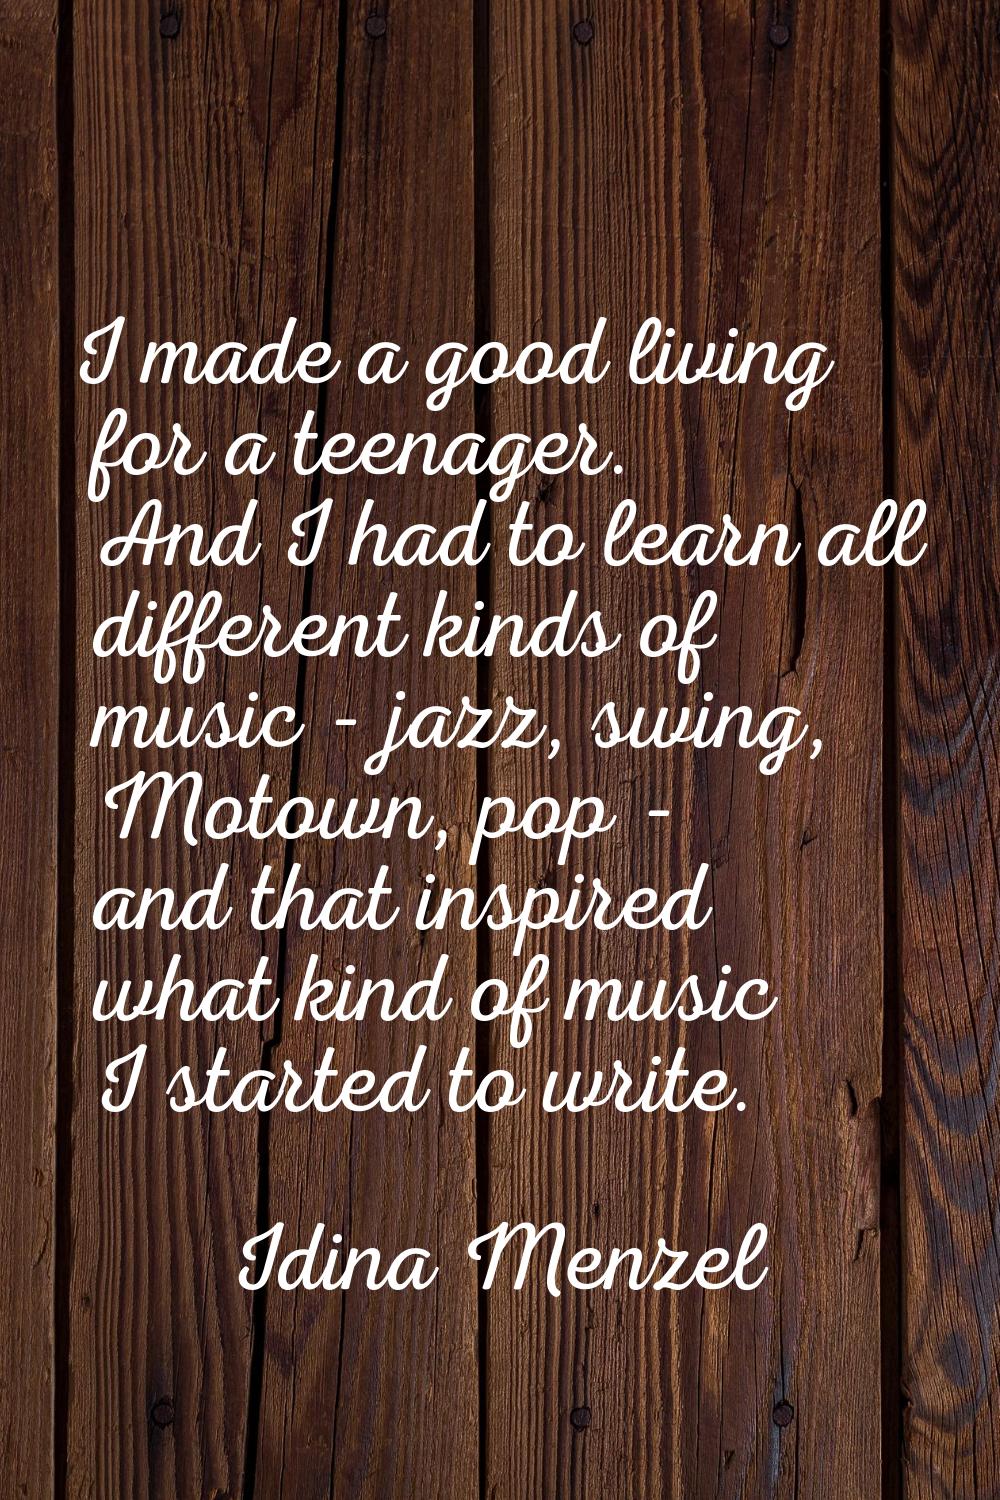 I made a good living for a teenager. And I had to learn all different kinds of music - jazz, swing,